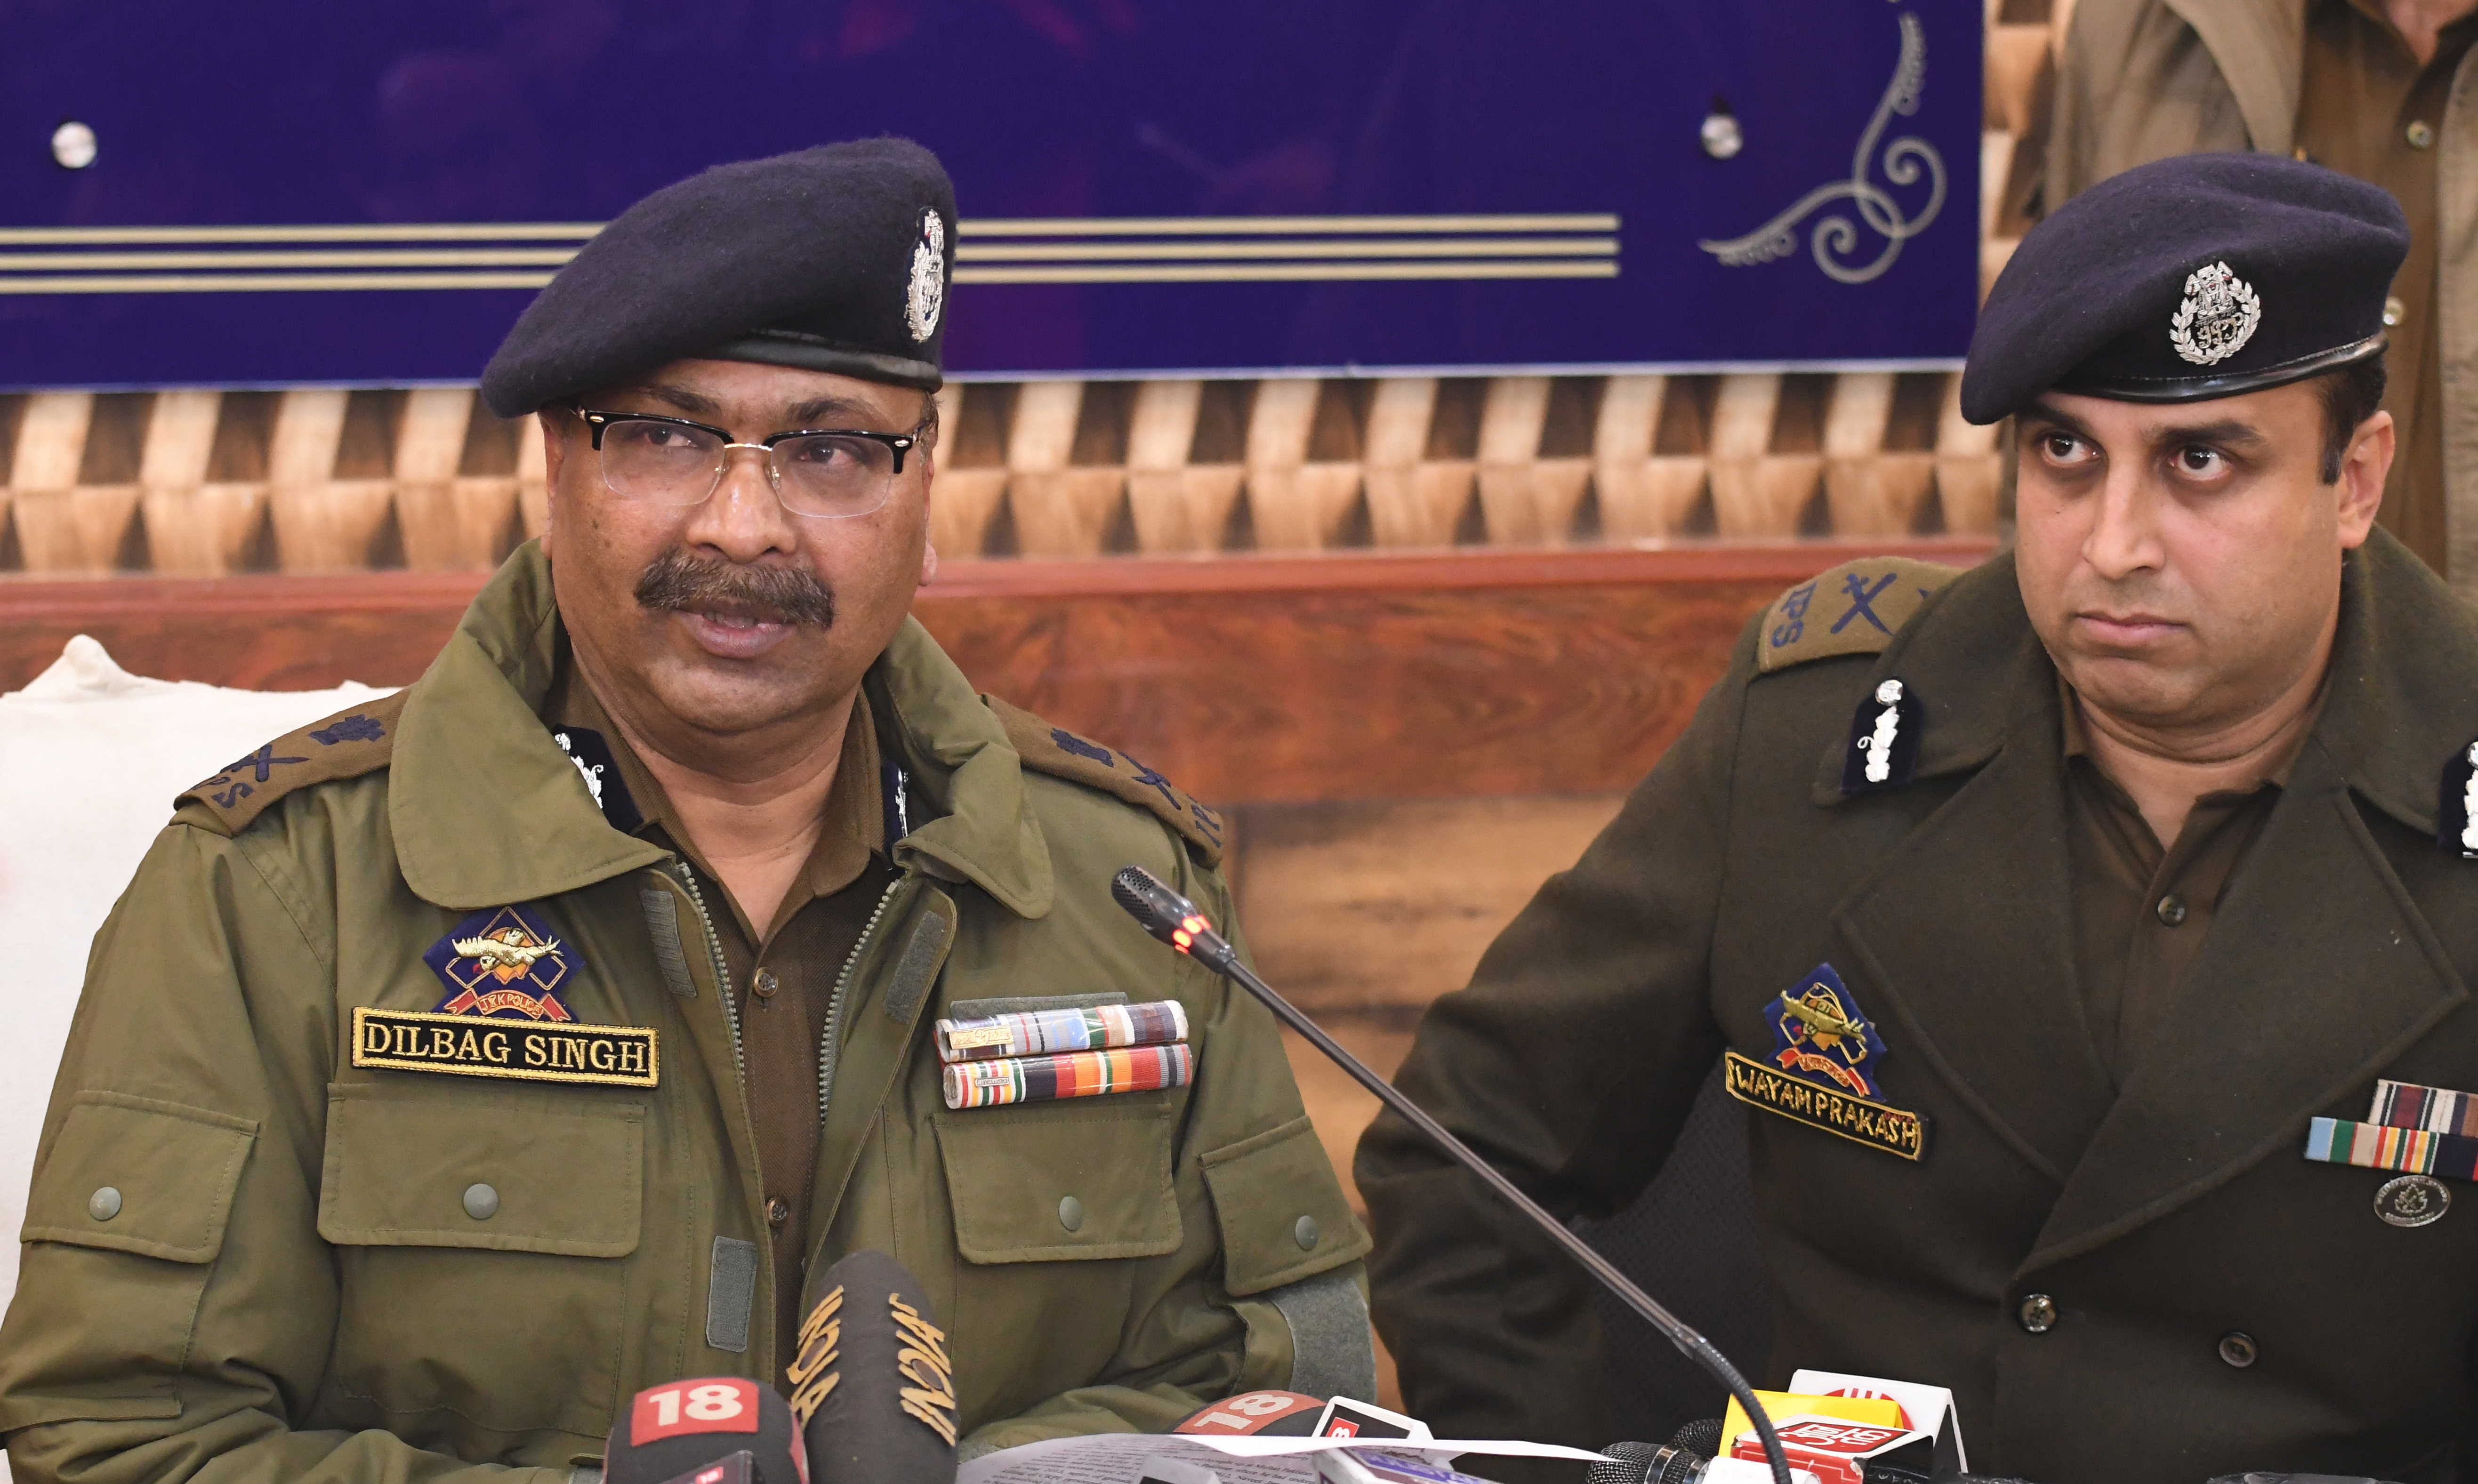 Director General of police (DGP) Jammu and Kashmir Dilbagh Singh. (File Photo)